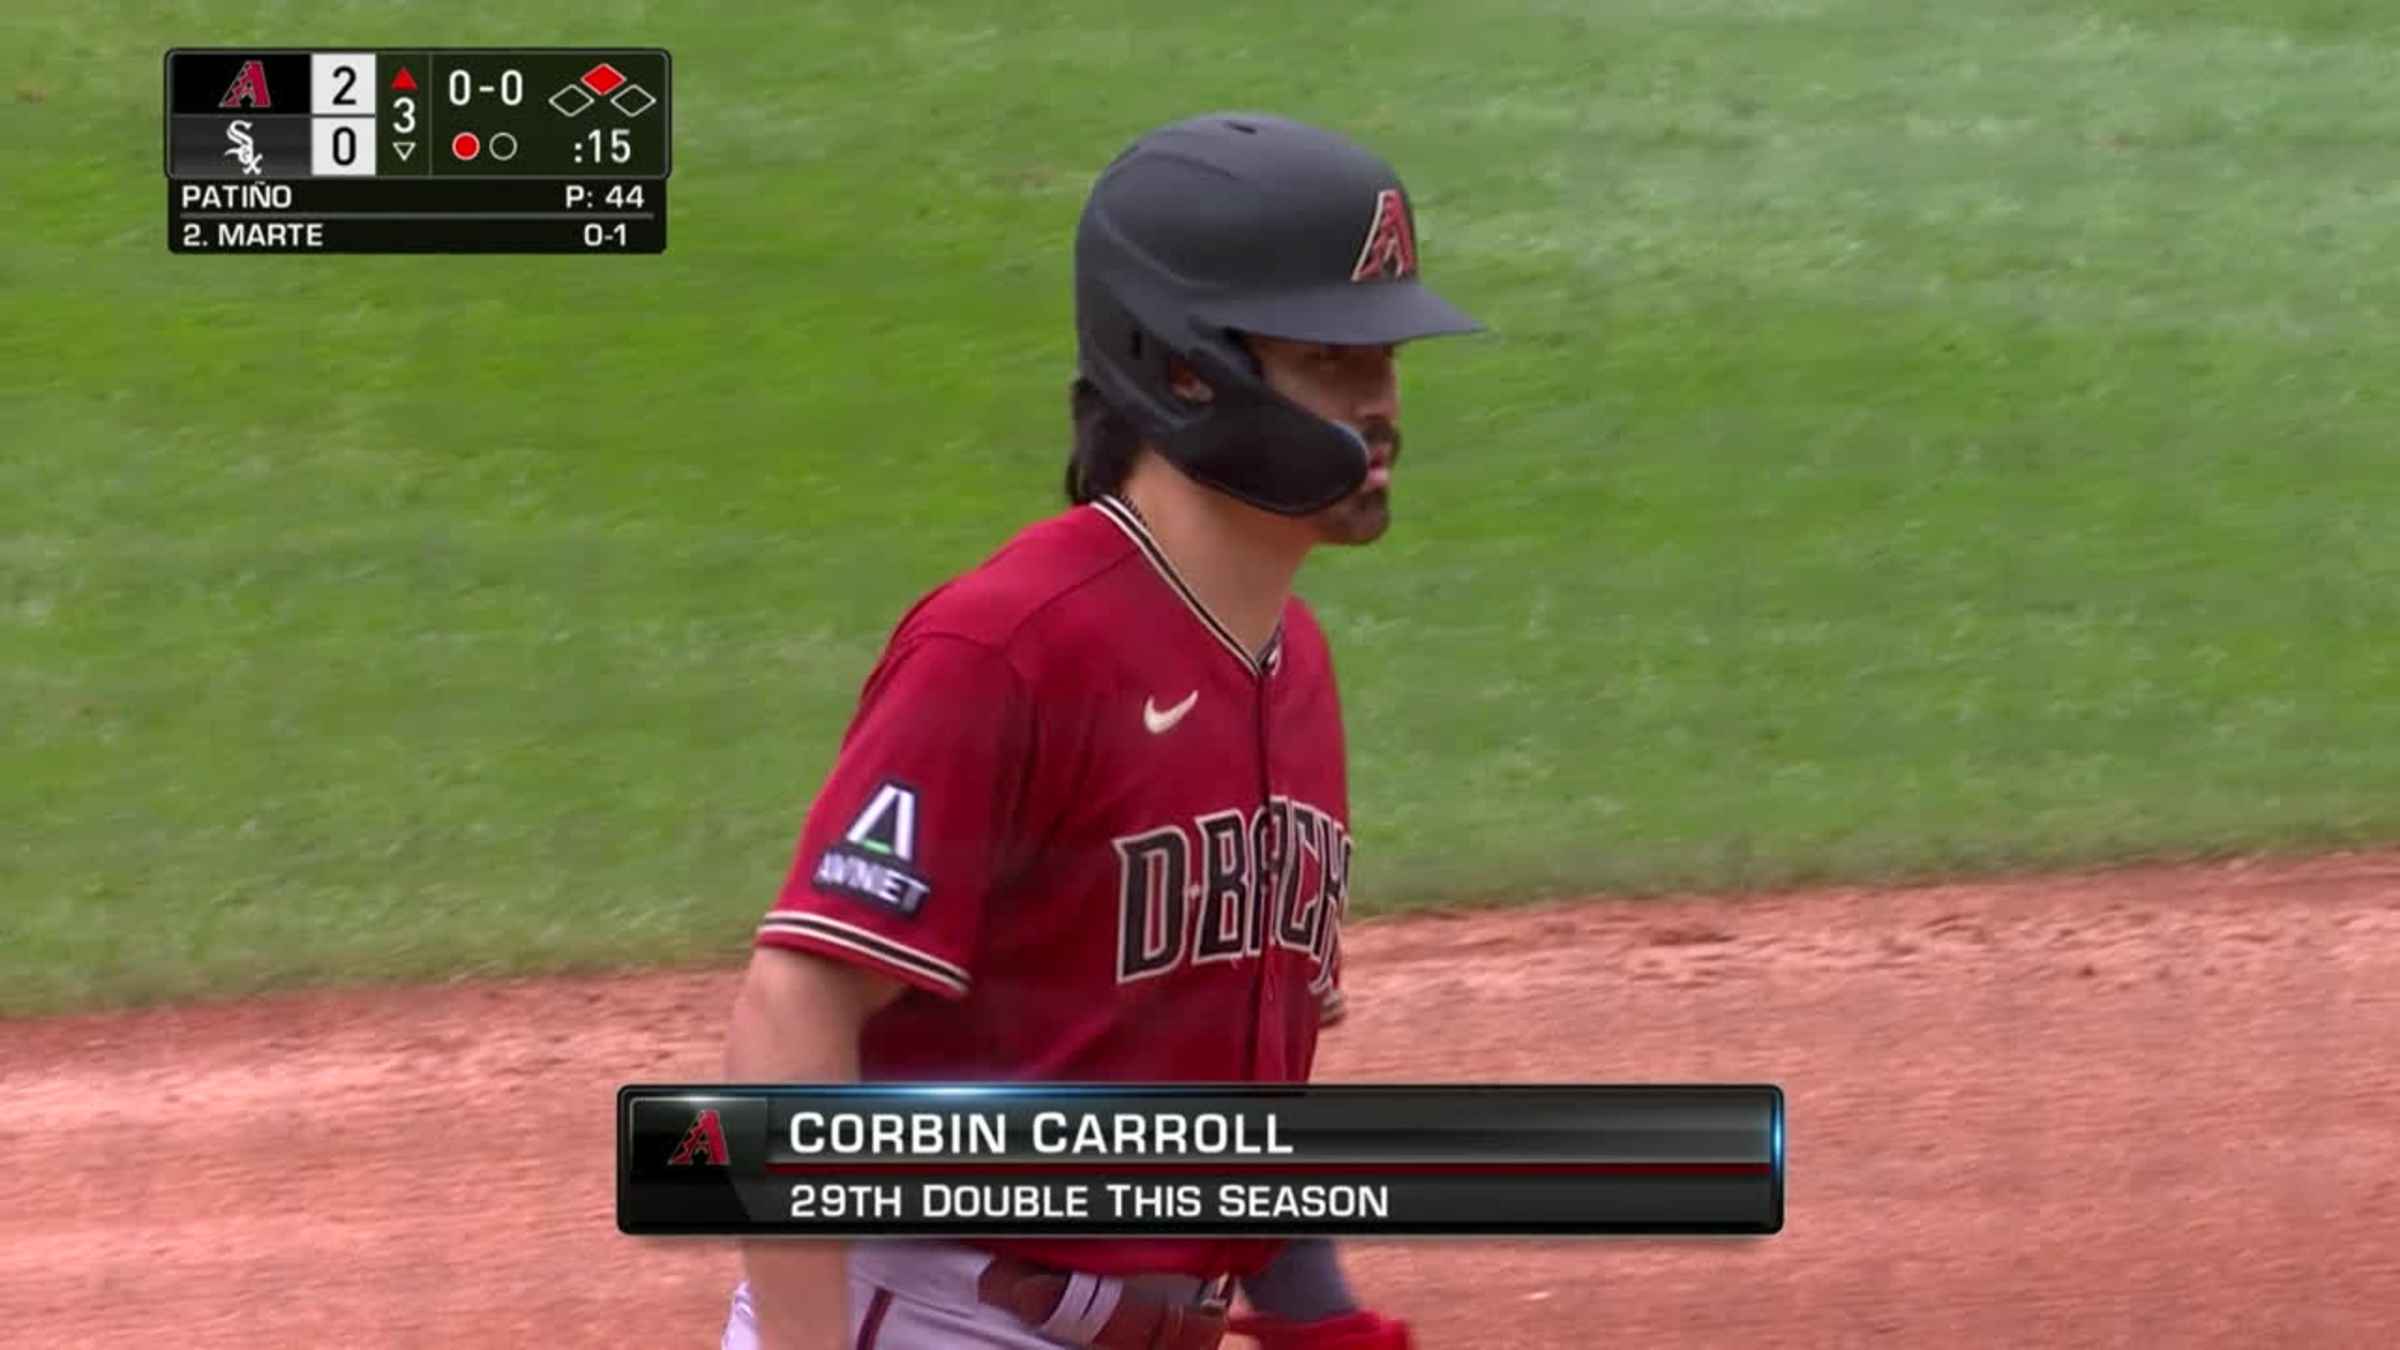 The What's Next Kid: The relentless drive of Corbin Carroll, the